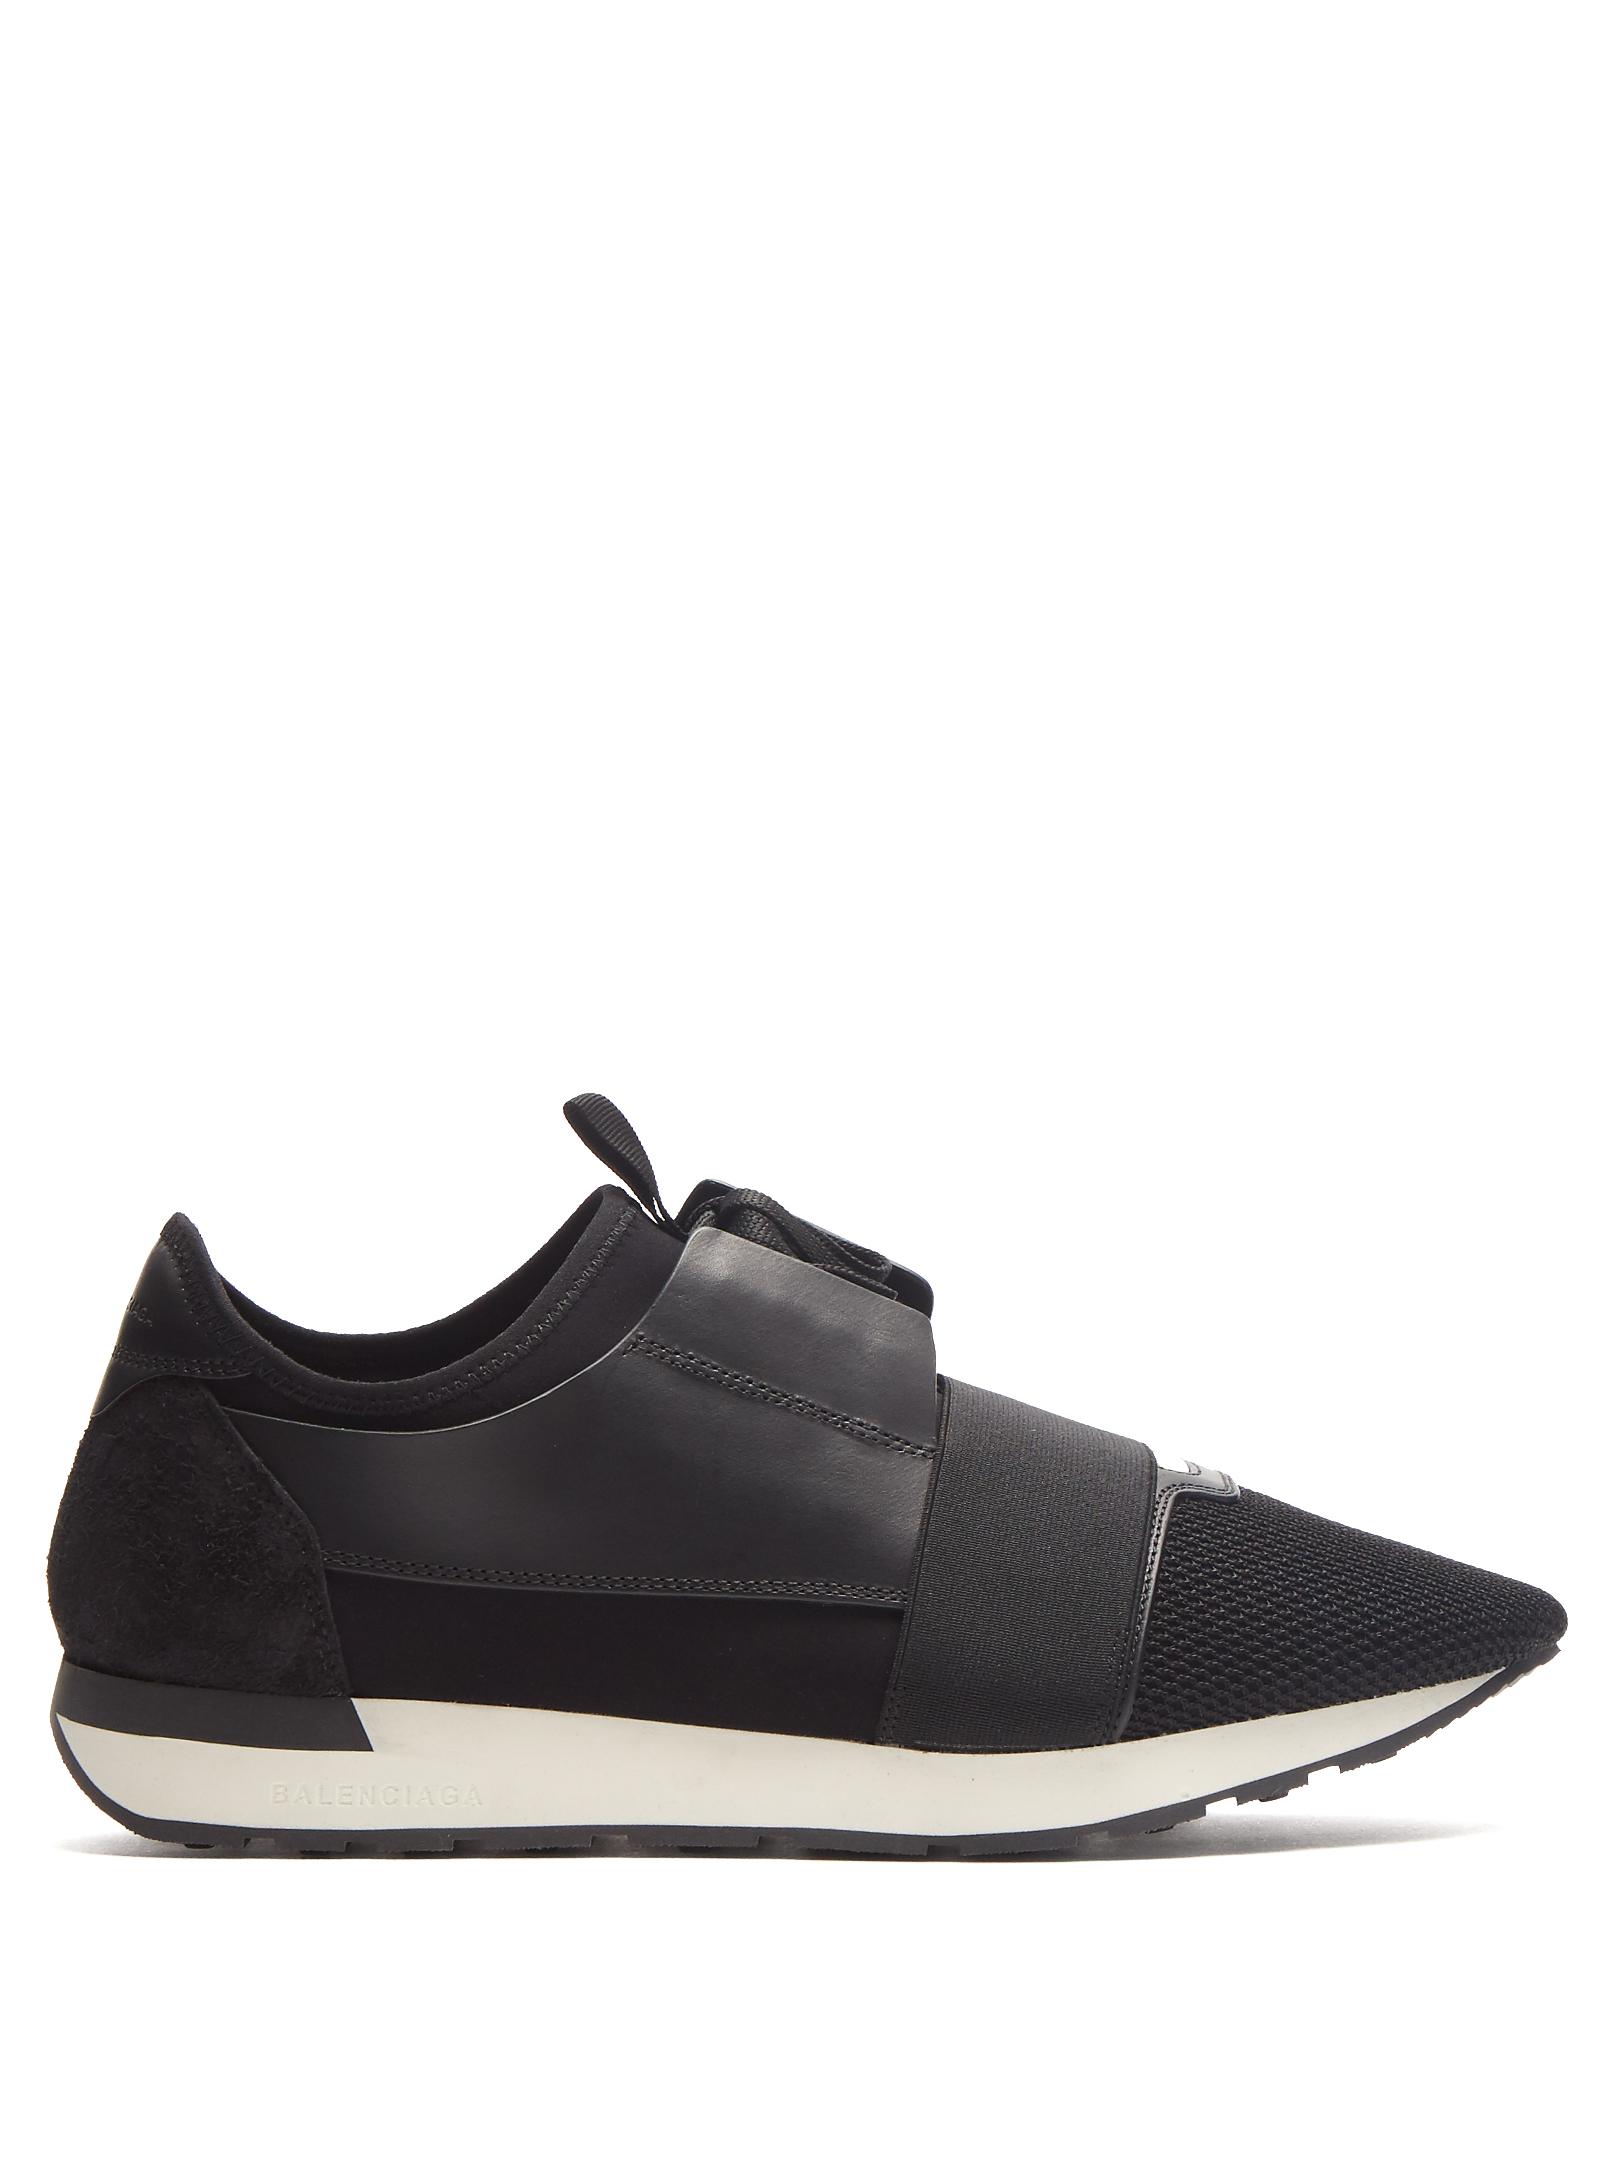 Lyst - Balenciaga Race Runner Panelled Low-top Trainers in Black for Men